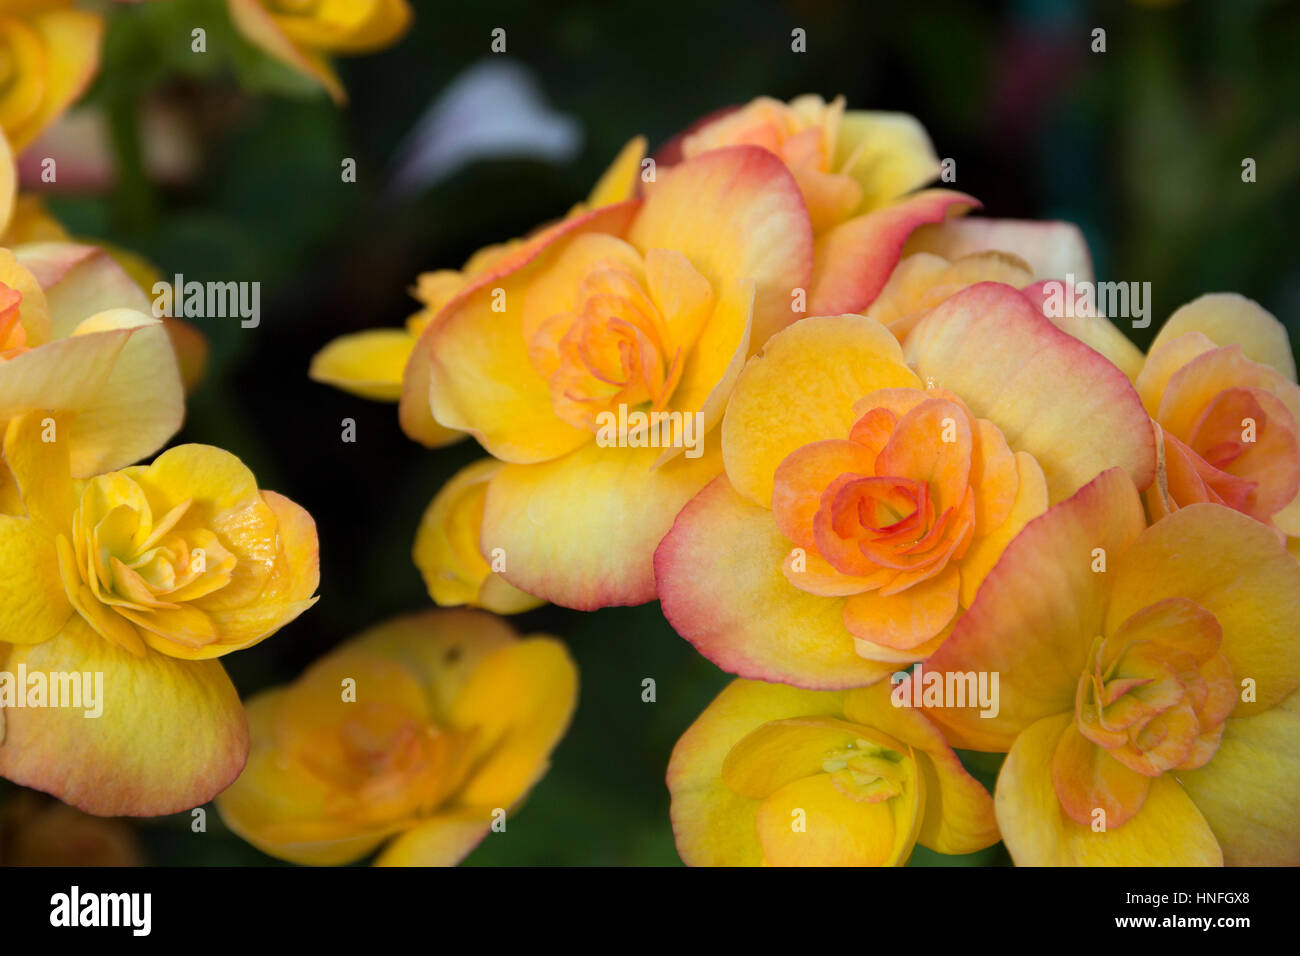 nature spring floral background yellow begonia flower blossom close up selective focus soft focus blurred flowers on background Stock Photo